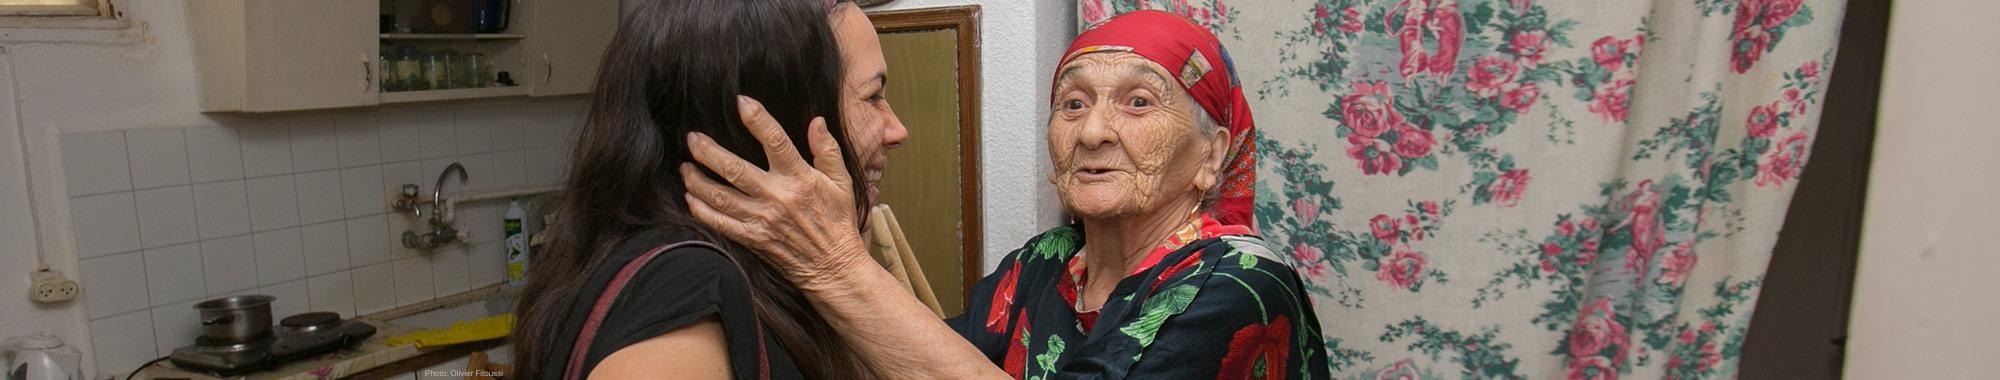 Elderly Jewish woman smiling and holding Yael's face while Yael is smiling.